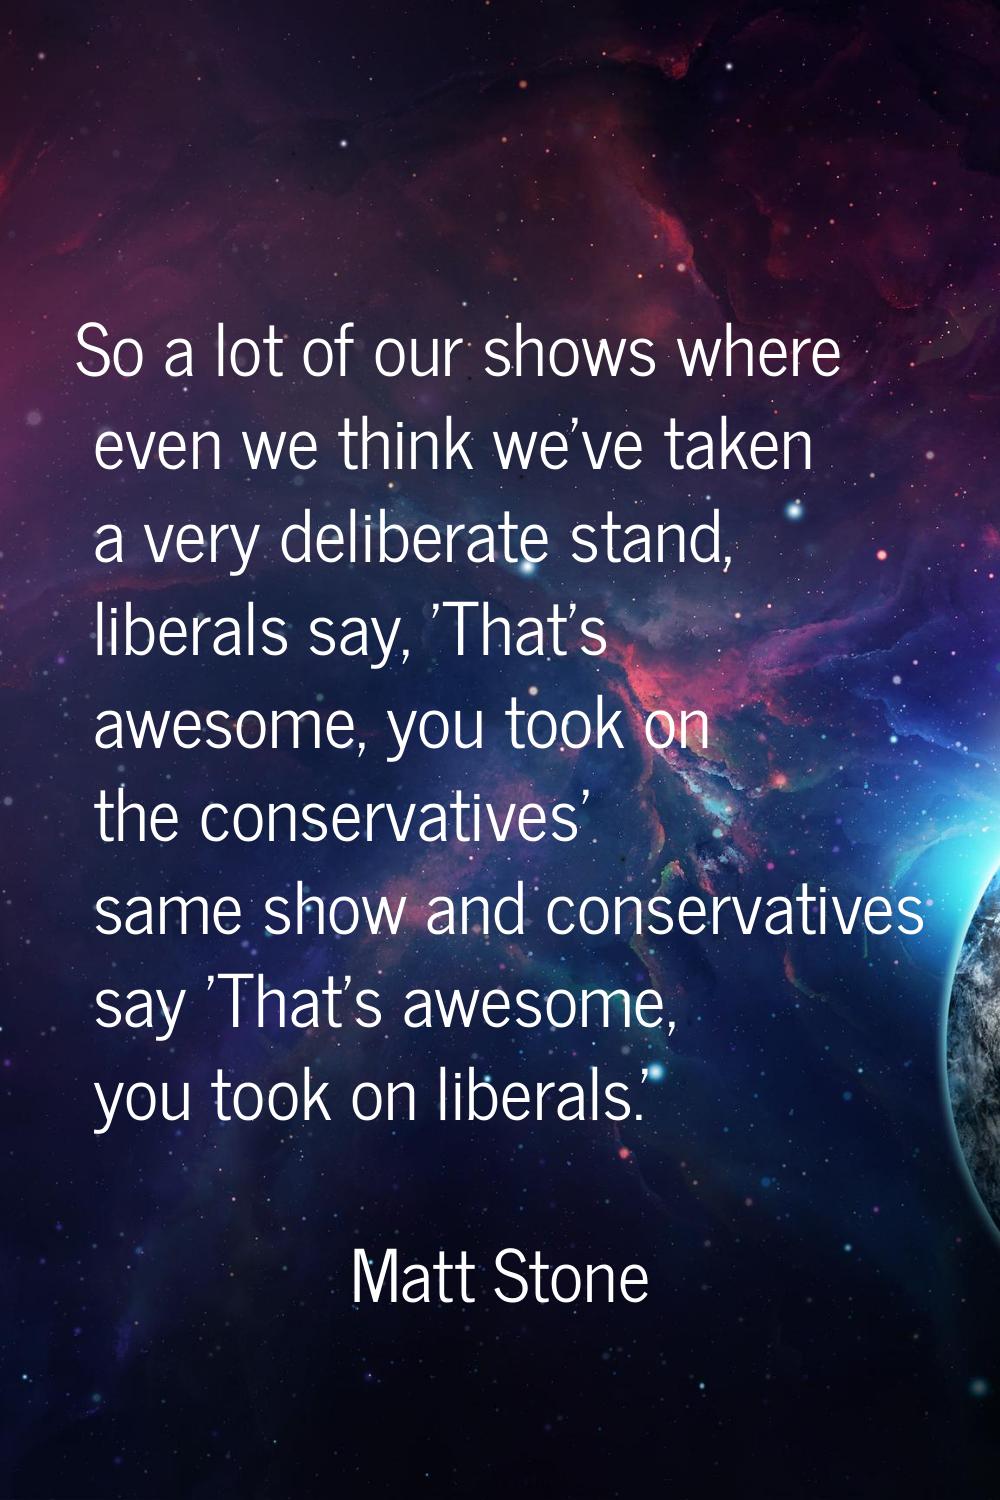 So a lot of our shows where even we think we've taken a very deliberate stand, liberals say, 'That'